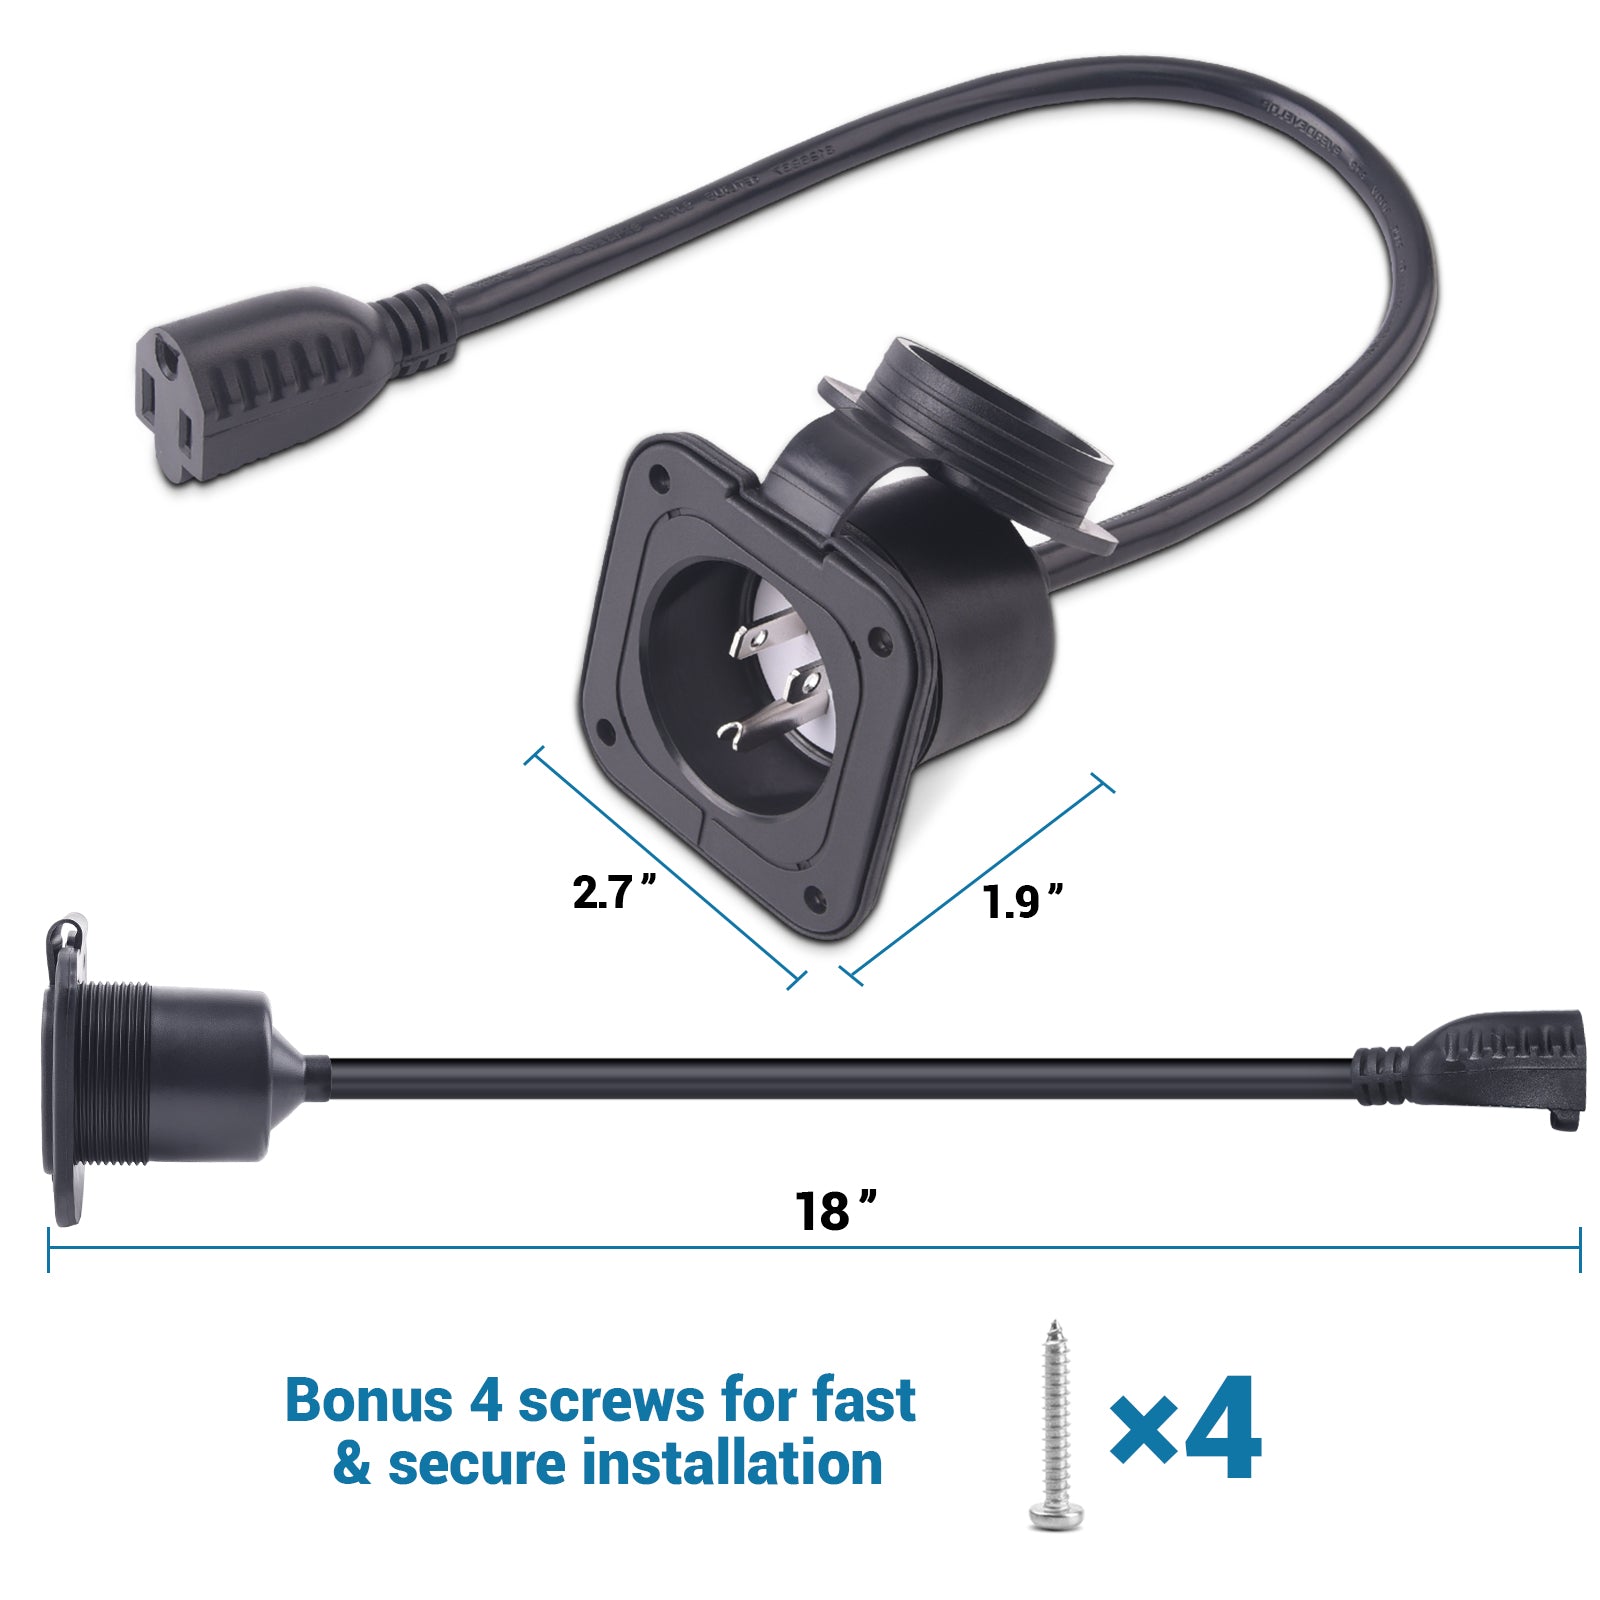 15 Amp 125V AC Port Plug with Integrated 18" Extension Cord 14AWG, Flanged Power Inlet Plug NEMA 5-15P 2 Pole 3-Wire